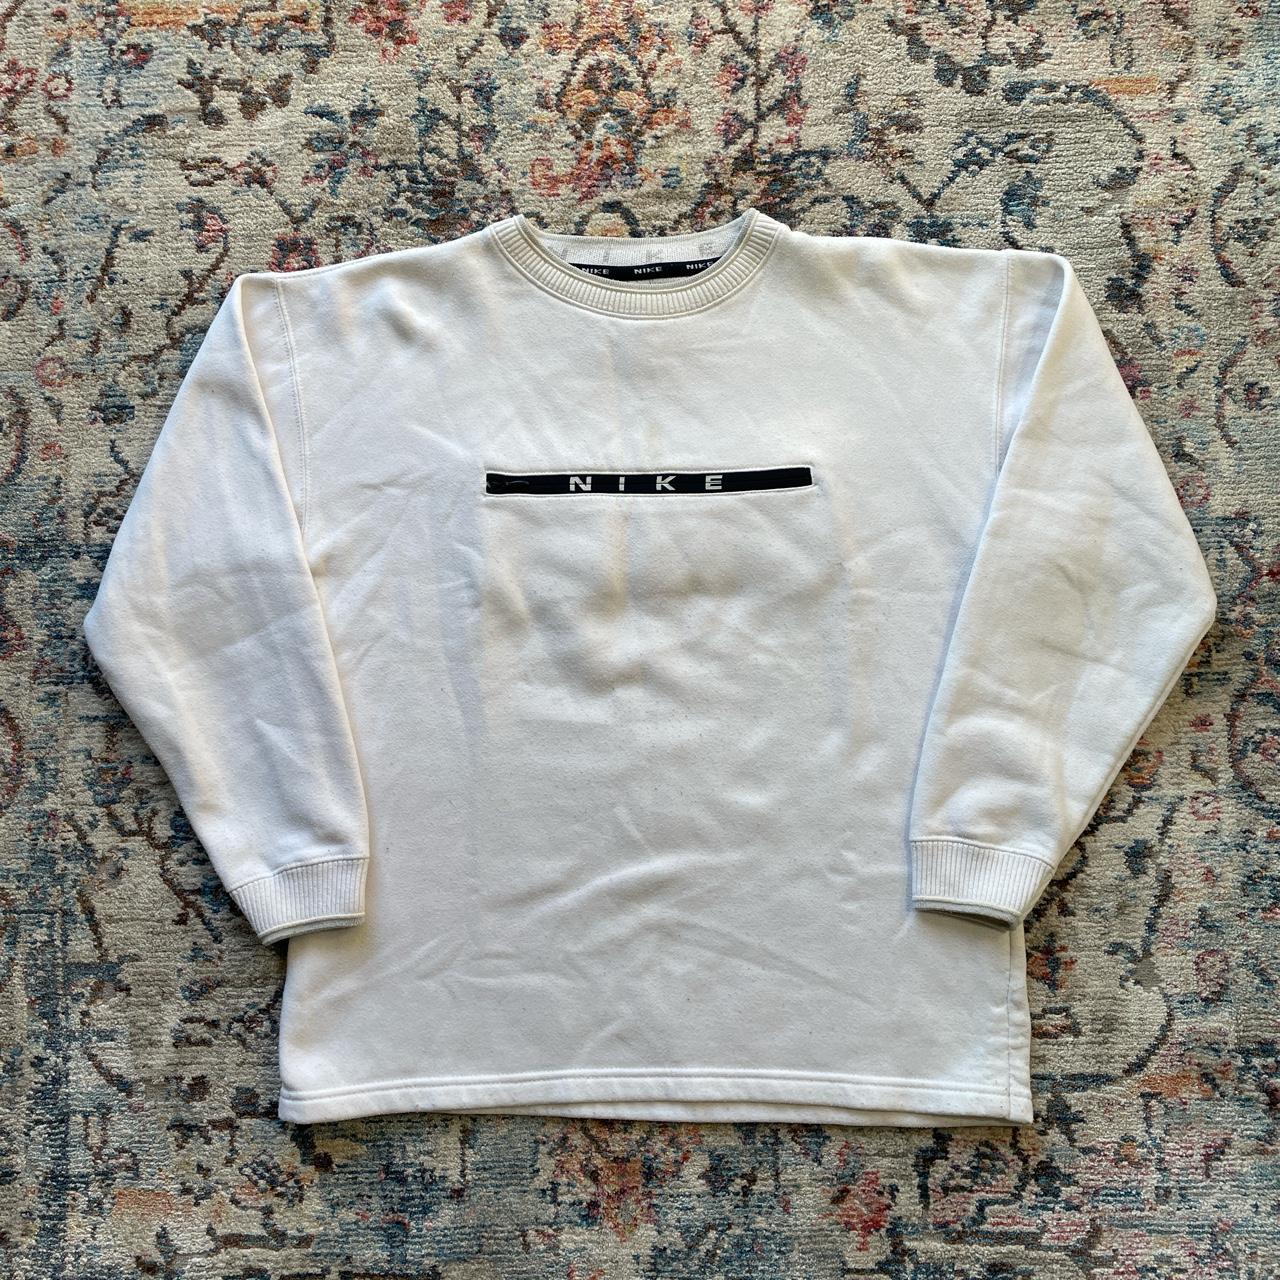 Vintage Nike White Spell Out Sweatshirt